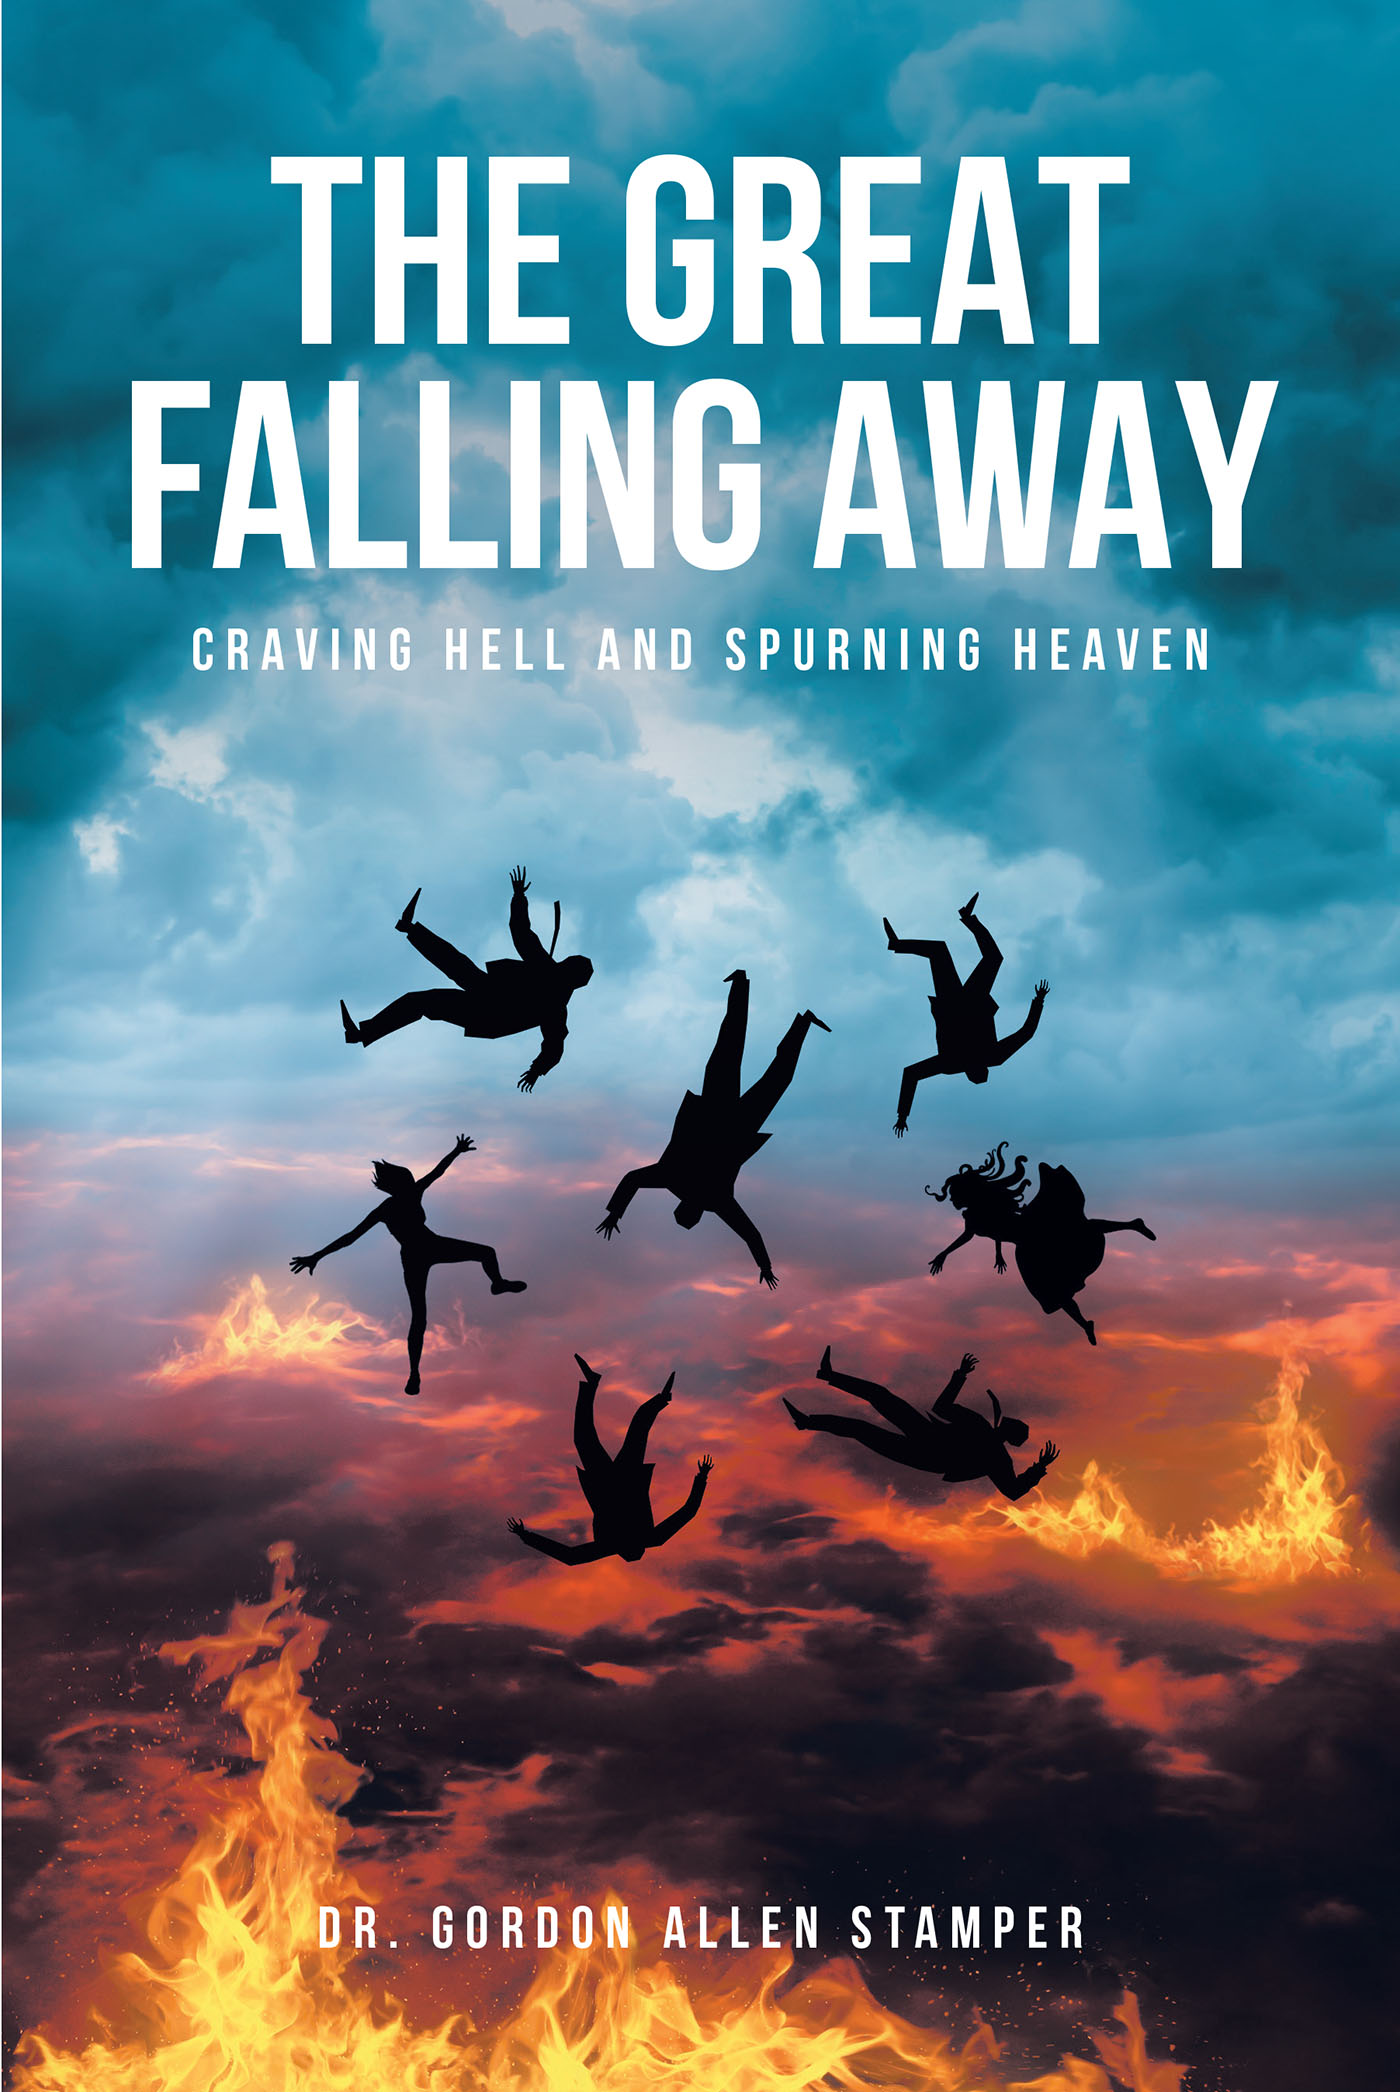 Dr. Gordon Allen Stamper’s Newly Released “THE GREAT FALLING AWAY: Craving Hell and Spurning Heaven” is a Compelling Discussion of Humanity’s Fall from Grace